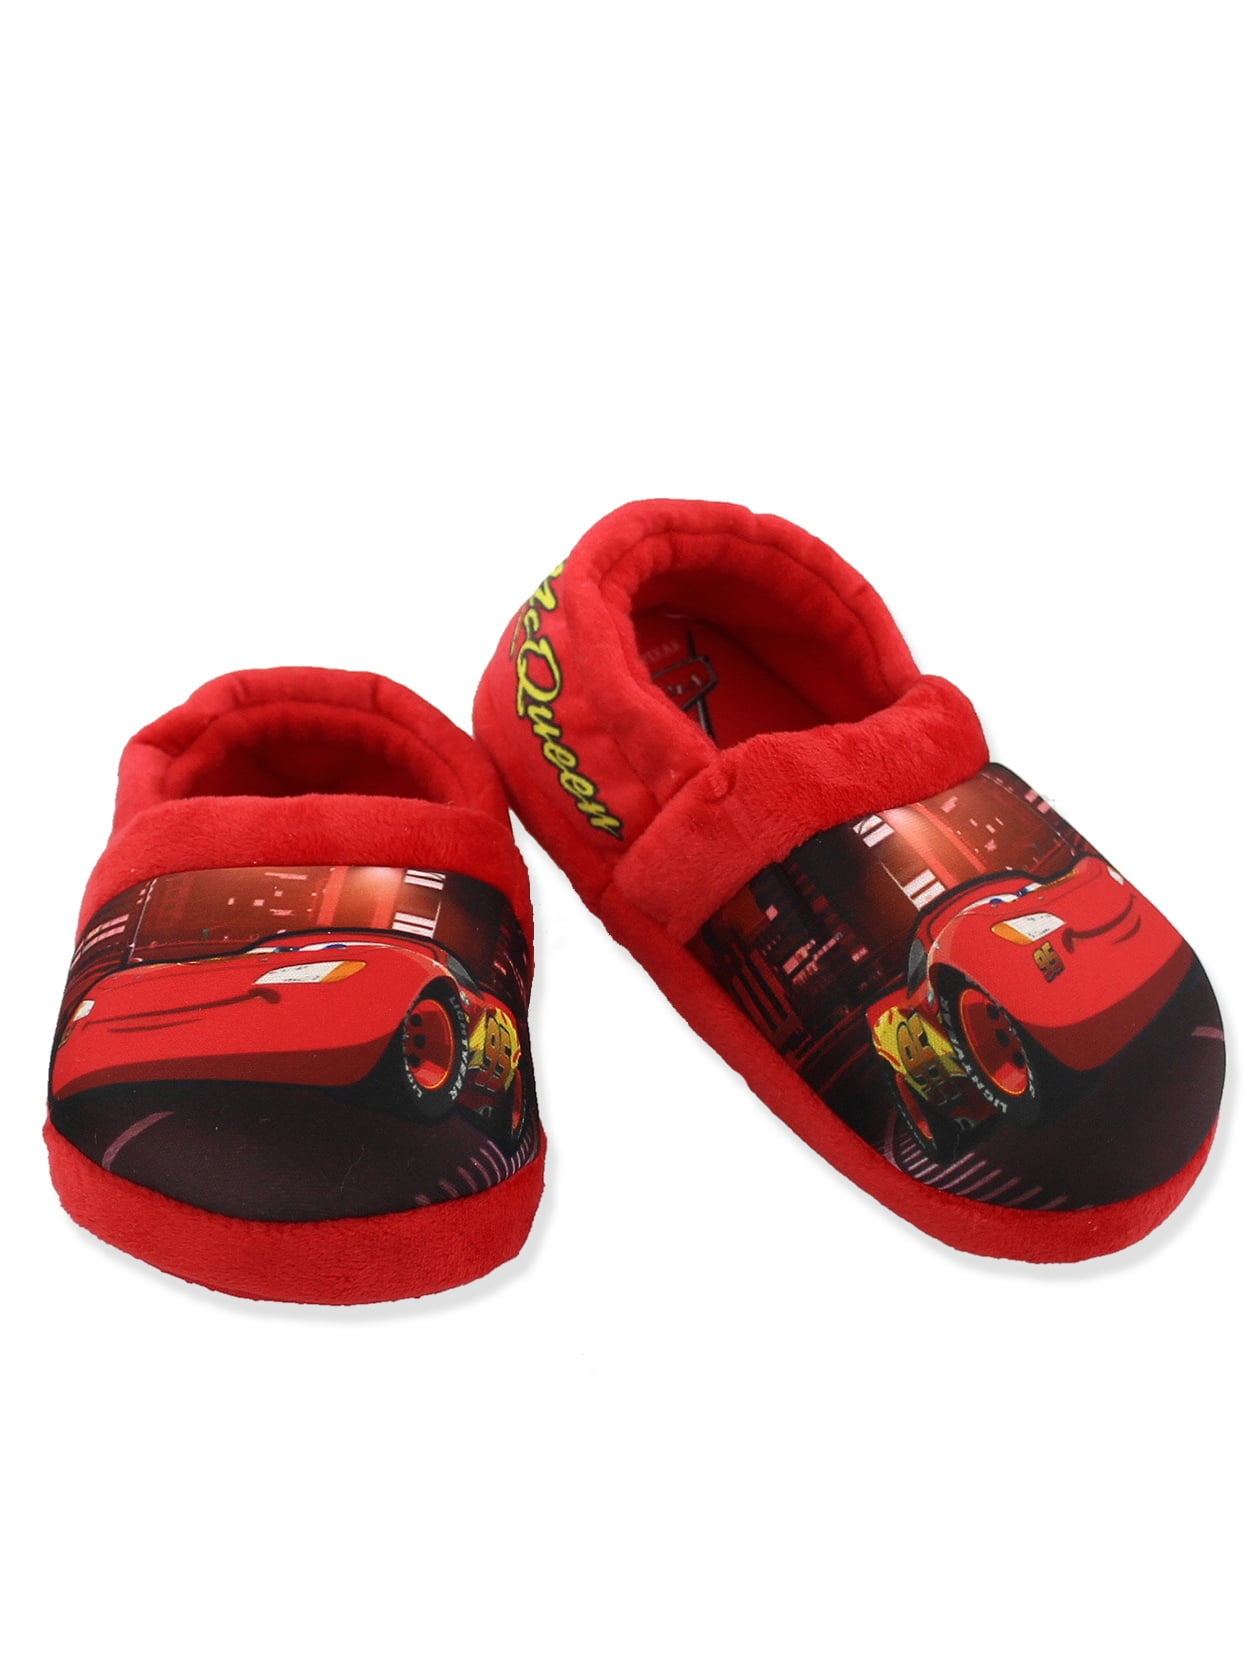 Disney Jake & the Never Land Pirates Toddler Boys Warm Comfy Slippers Sz 5/6 7/8 